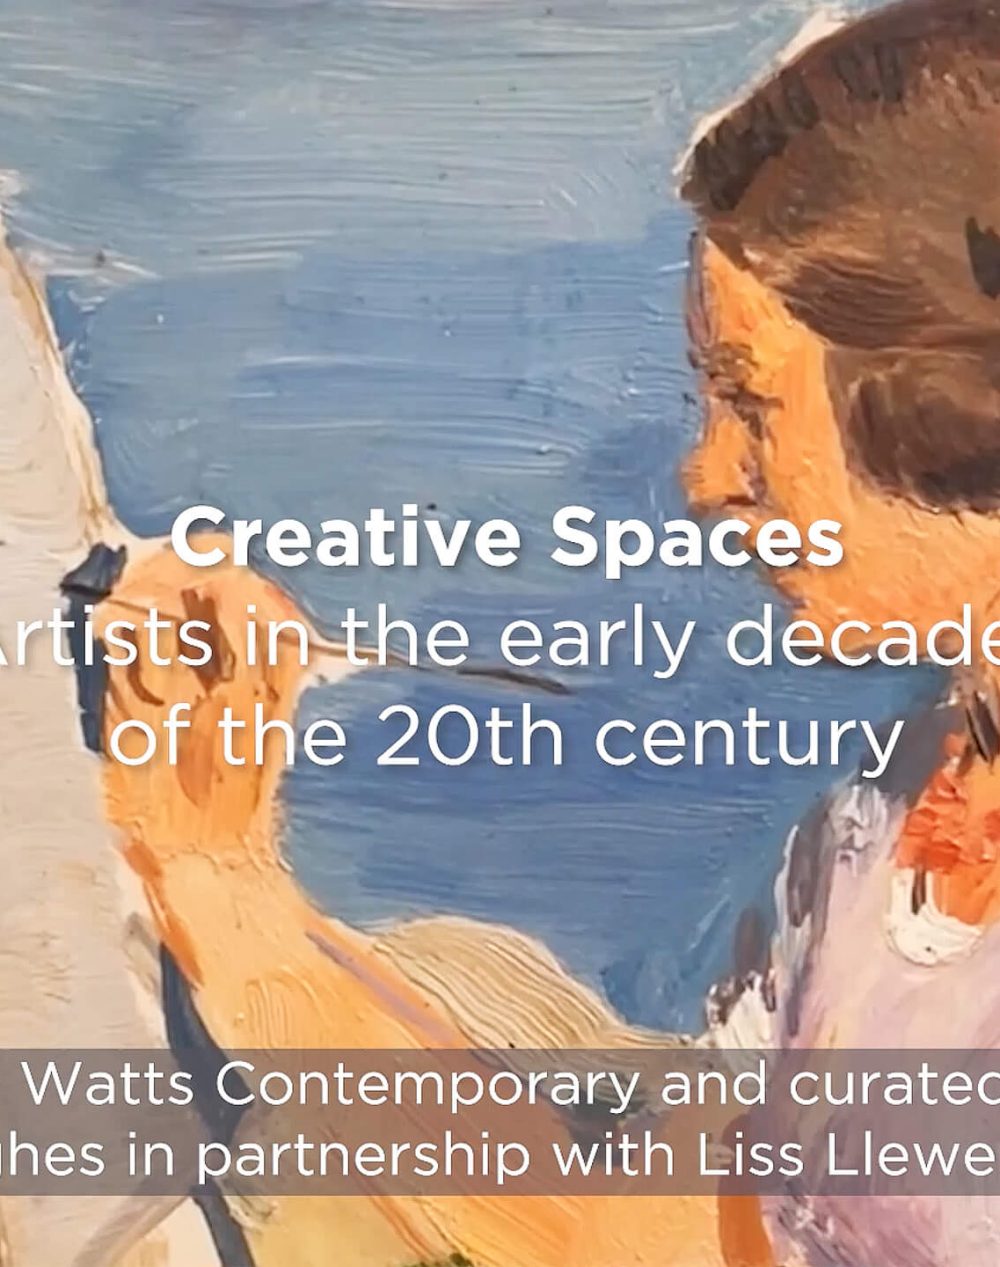 Maudji Llewellyn takes you on a tour of Creative Spaces at Watt's Contemporary